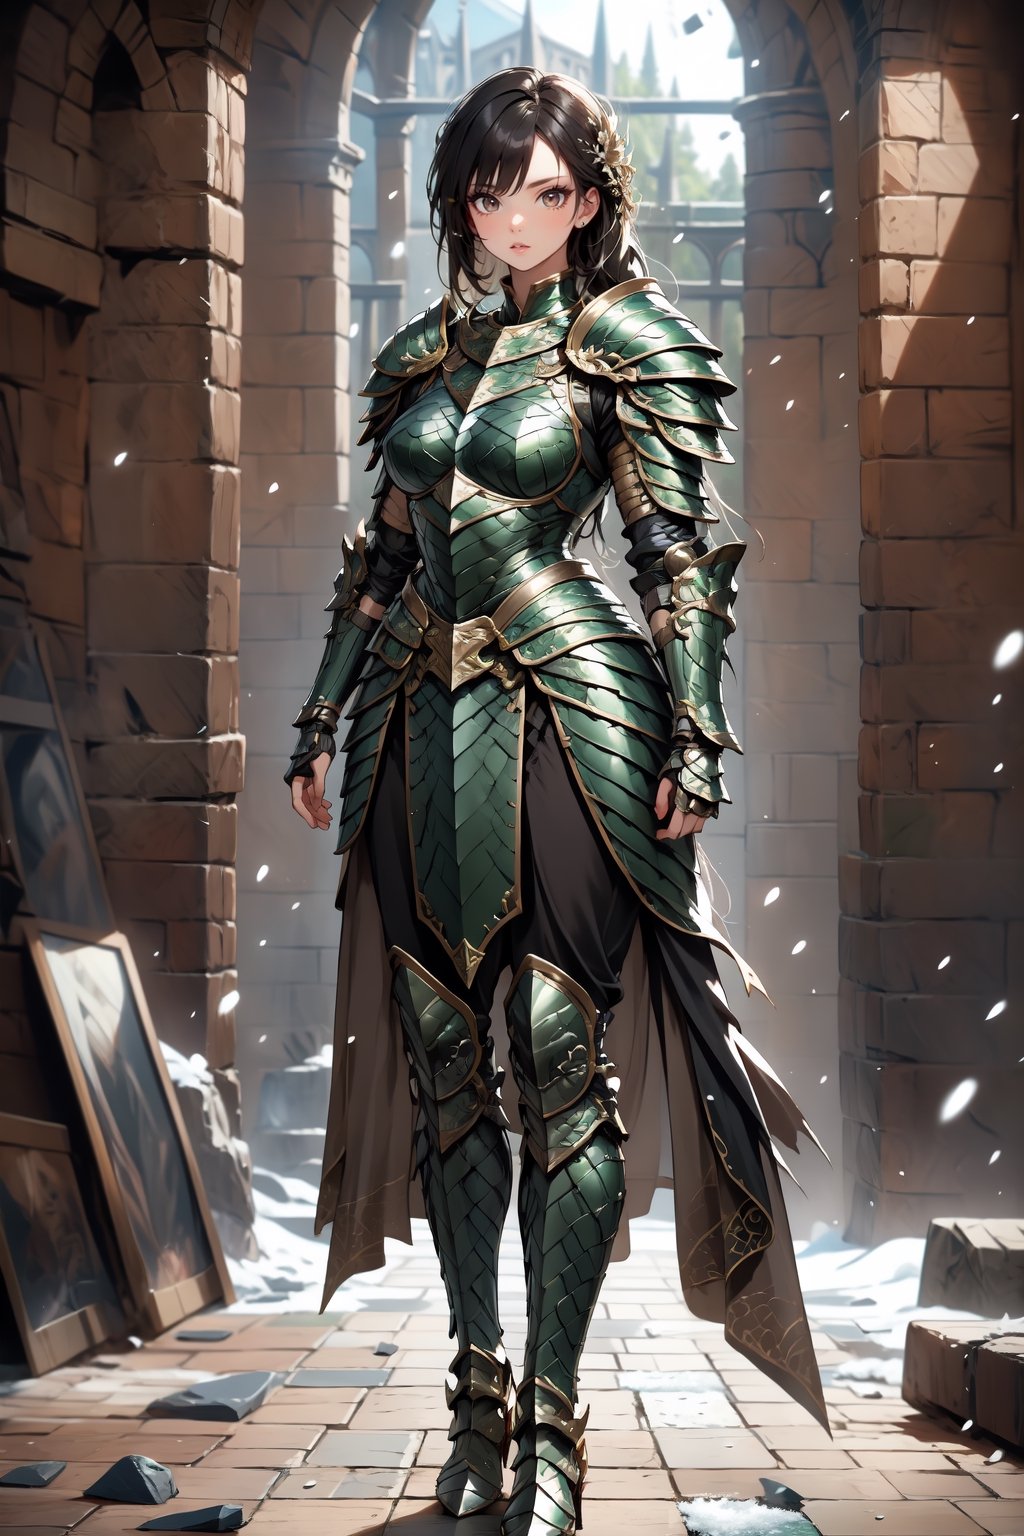 Beautiful 27 year old woman, (brown eyes), ((strong physique body)), (black hair), long_hair:1.3, , bangs, (serious look), hourglass body shape, detailed eyes, normal breasts quality, slim waist, (strong physique), upper body , gauntlets, (detailed armor), lower body armor, black cape, broken stone floor, broken stone wall, snow falling, ((full-body_portrait)), (evil aura around her), Commander of knights,dragon armor